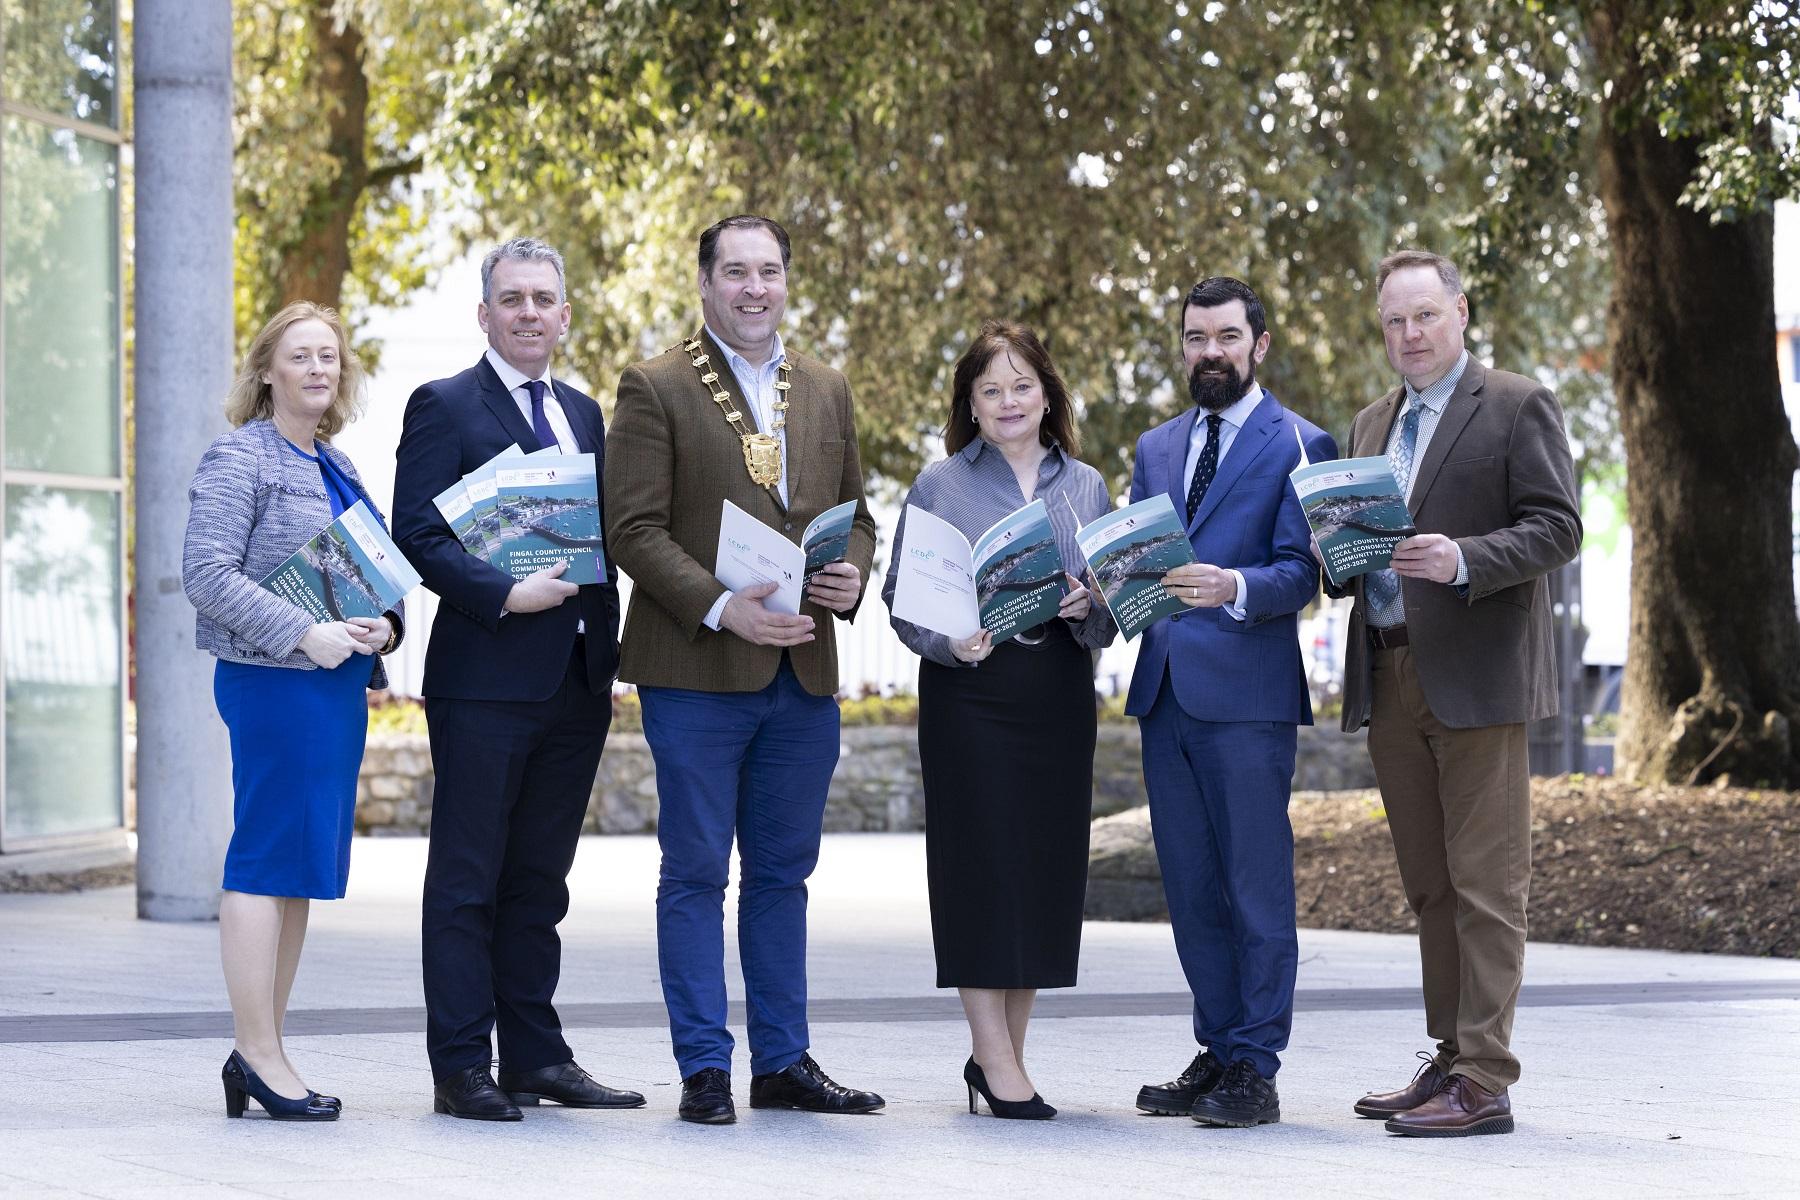 A new plan for Fingal's future growth and sustainability has been launched